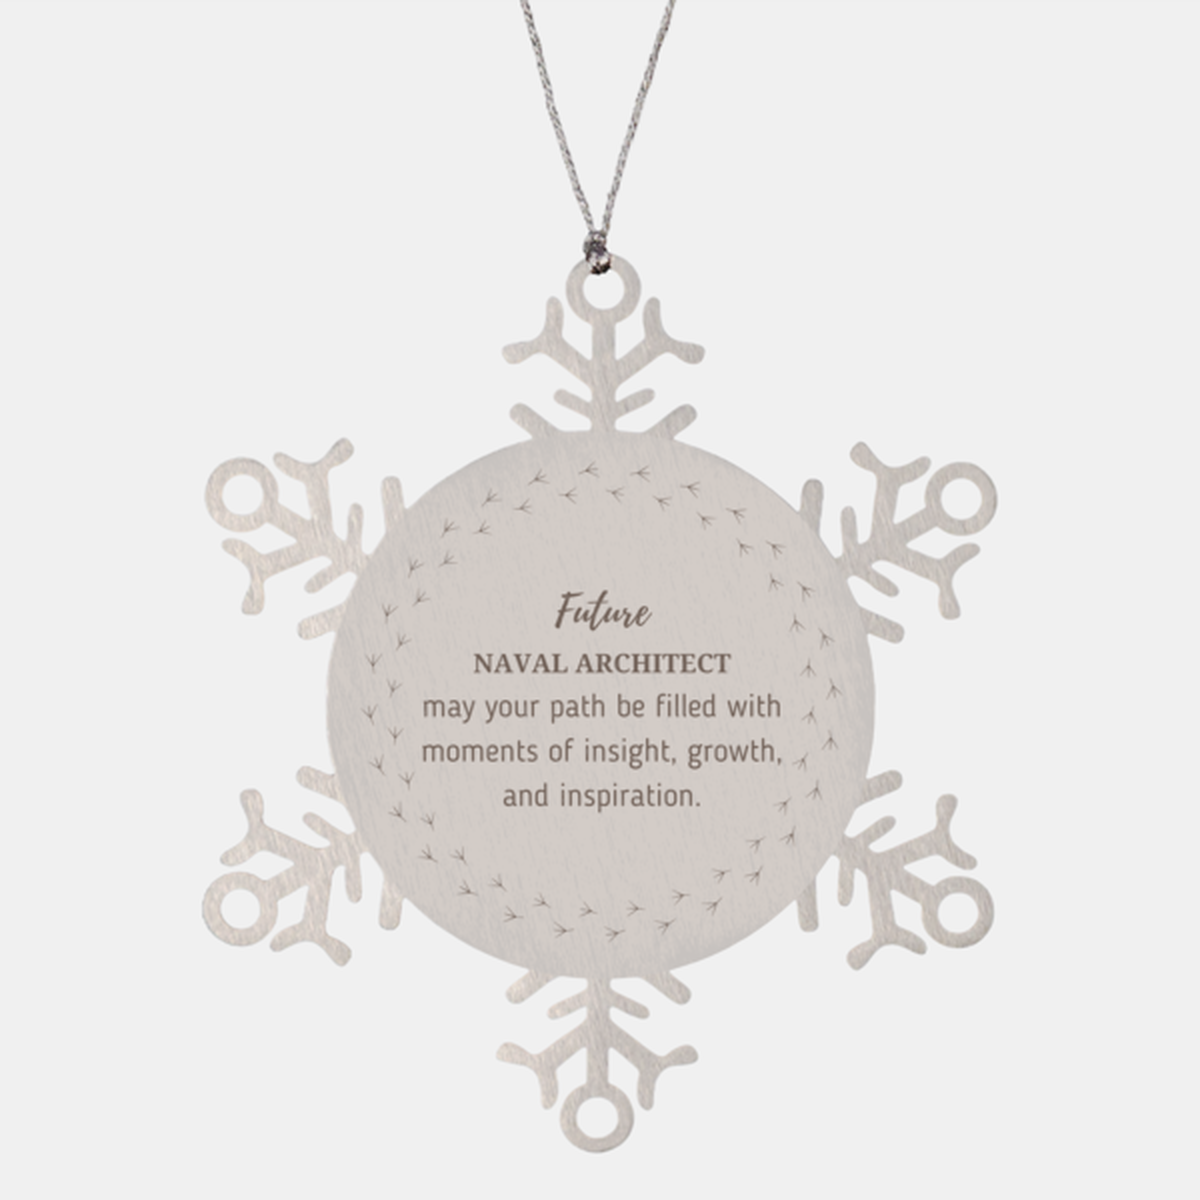 Future Naval Architect Gifts, May your path be filled with moments of insight, Graduation Gifts for New Naval Architect, Christmas Unique Snowflake Ornament For Men, Women, Friends